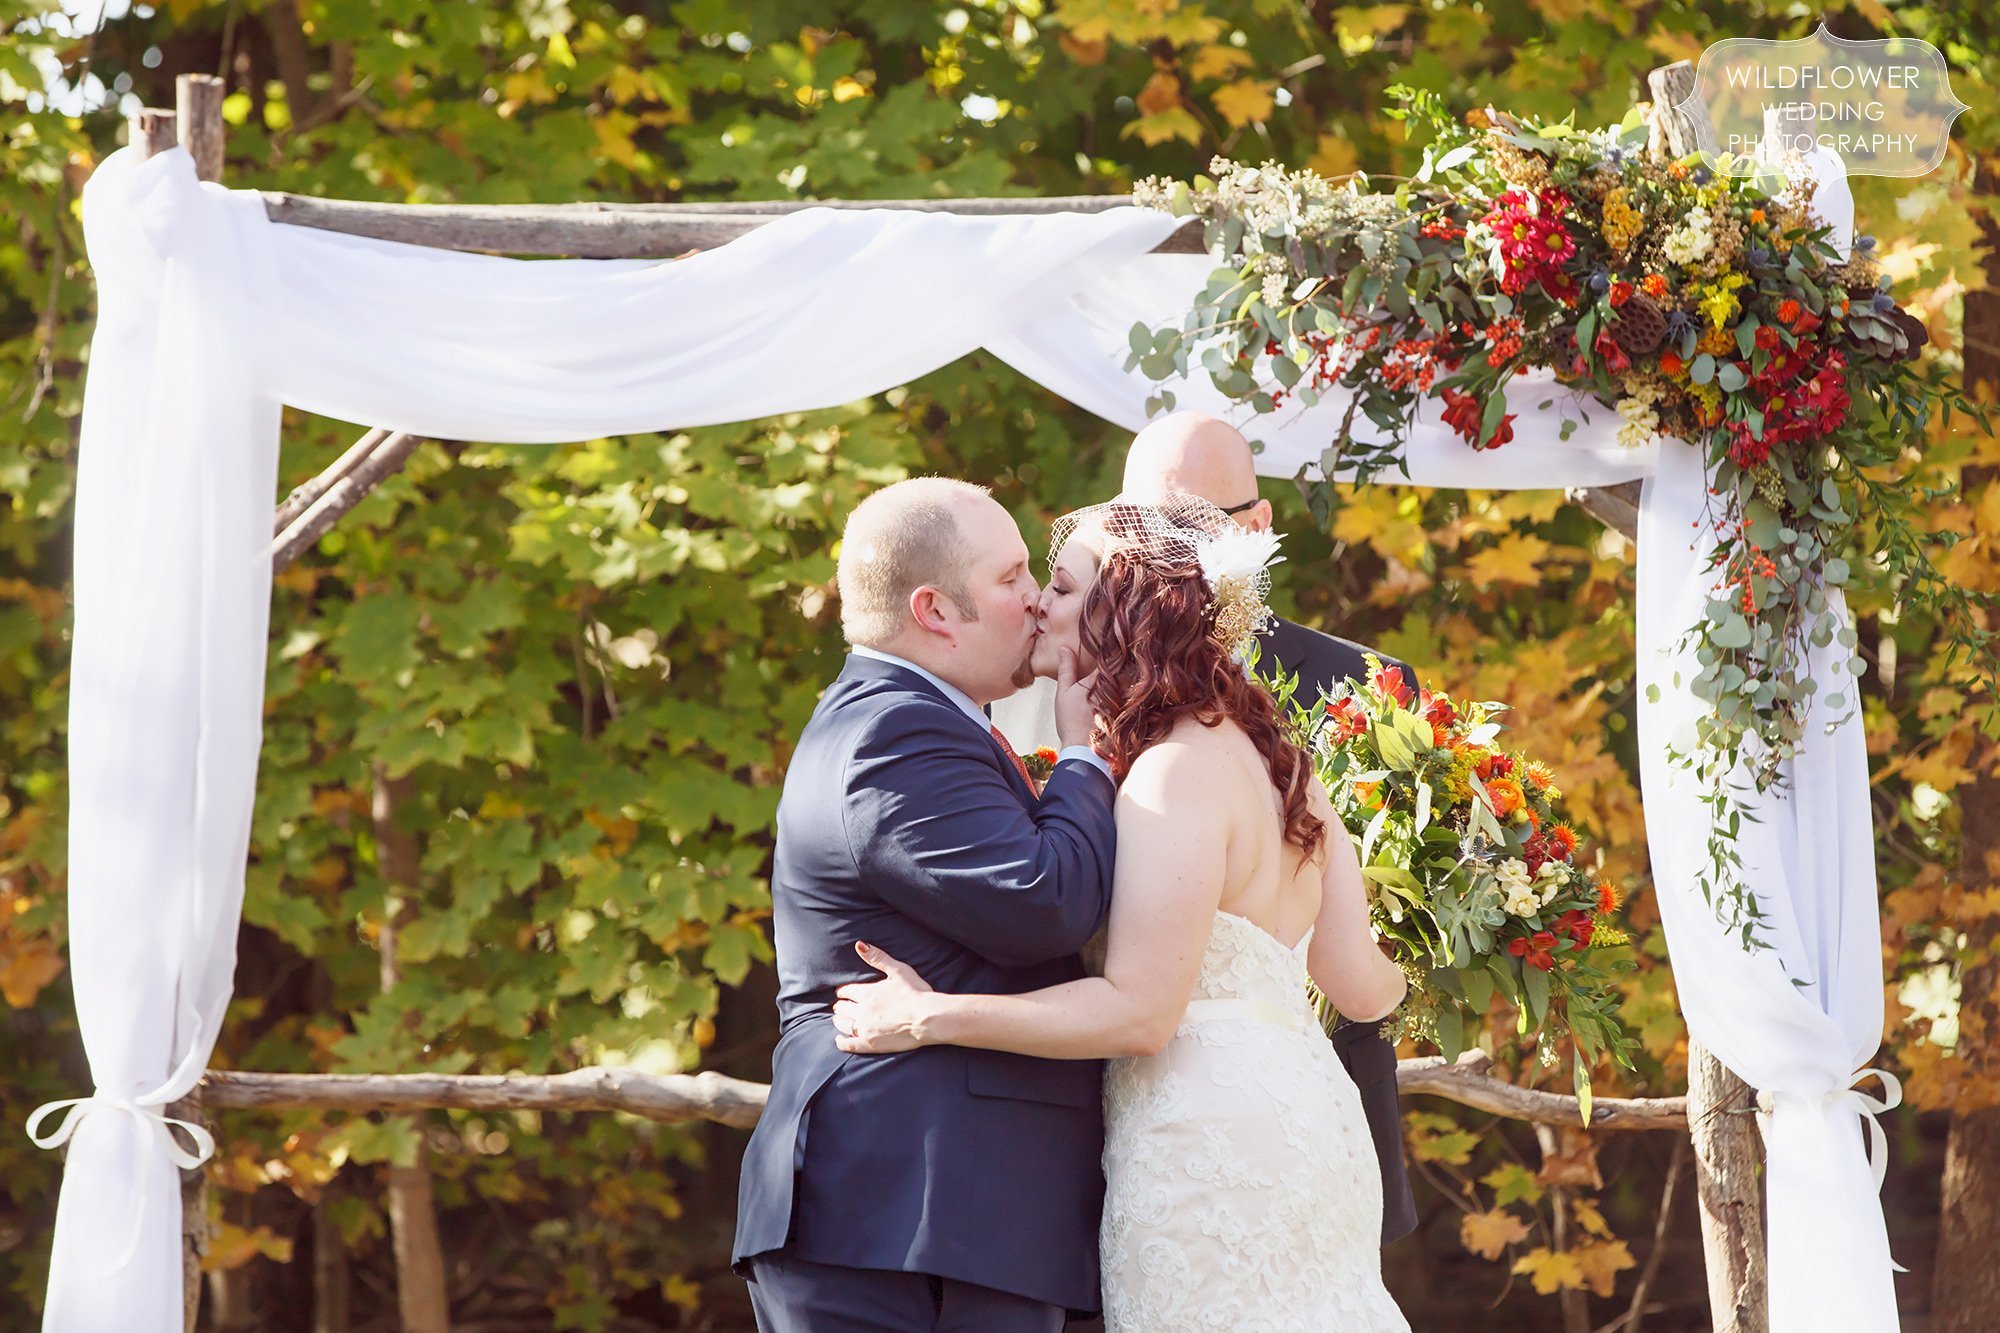 The bride and groom share their first kiss at the end of their outdoor ceremony at the Schwinn Produce Farm venue.